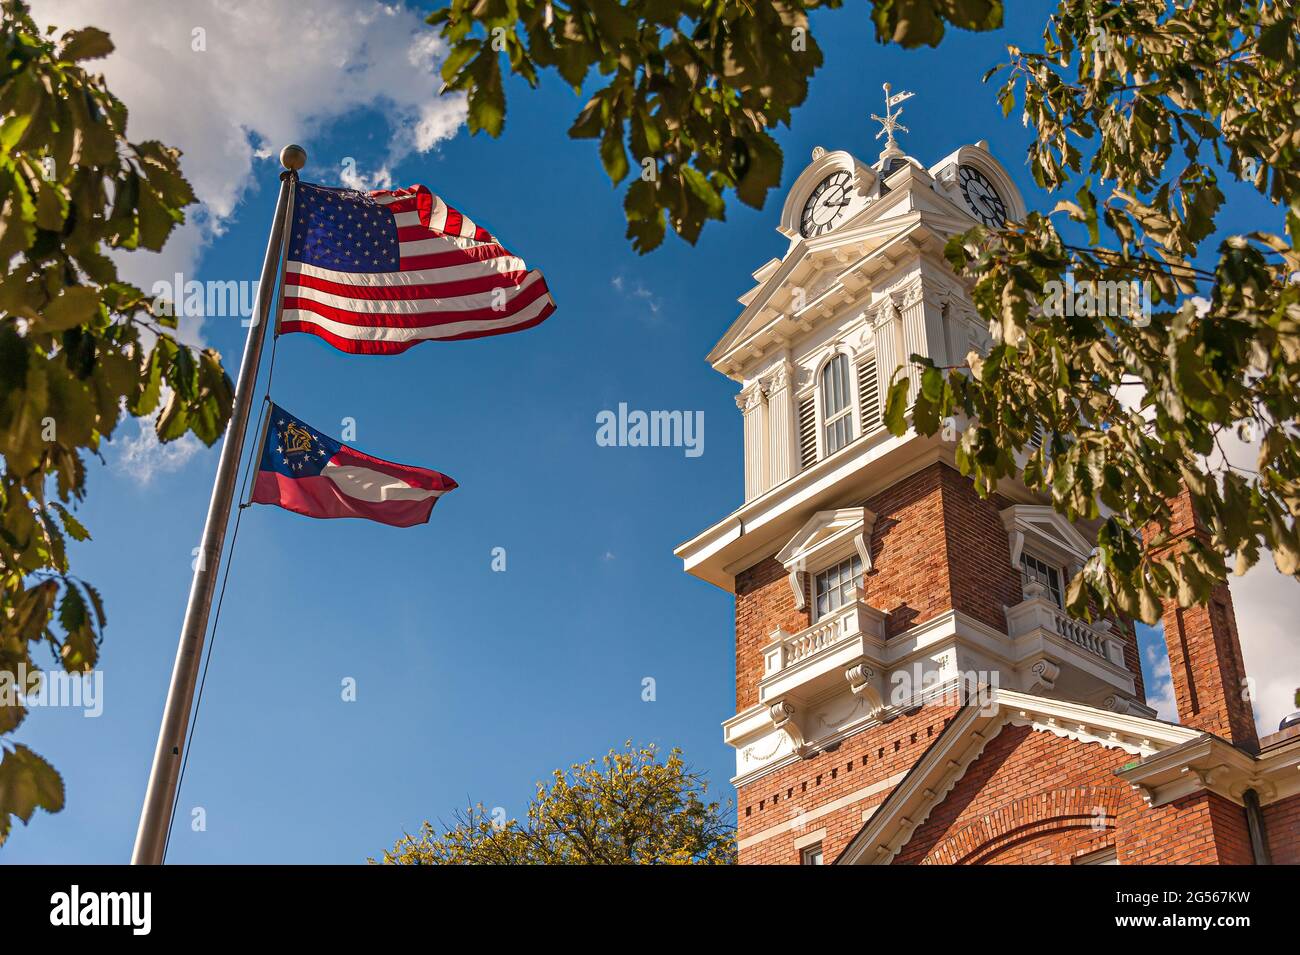 American flag and Georgia state flag waving in front of the Gwinnett Historic Courthouse on the town square in Lawrenceville, Georgia. (USA) Stock Photo